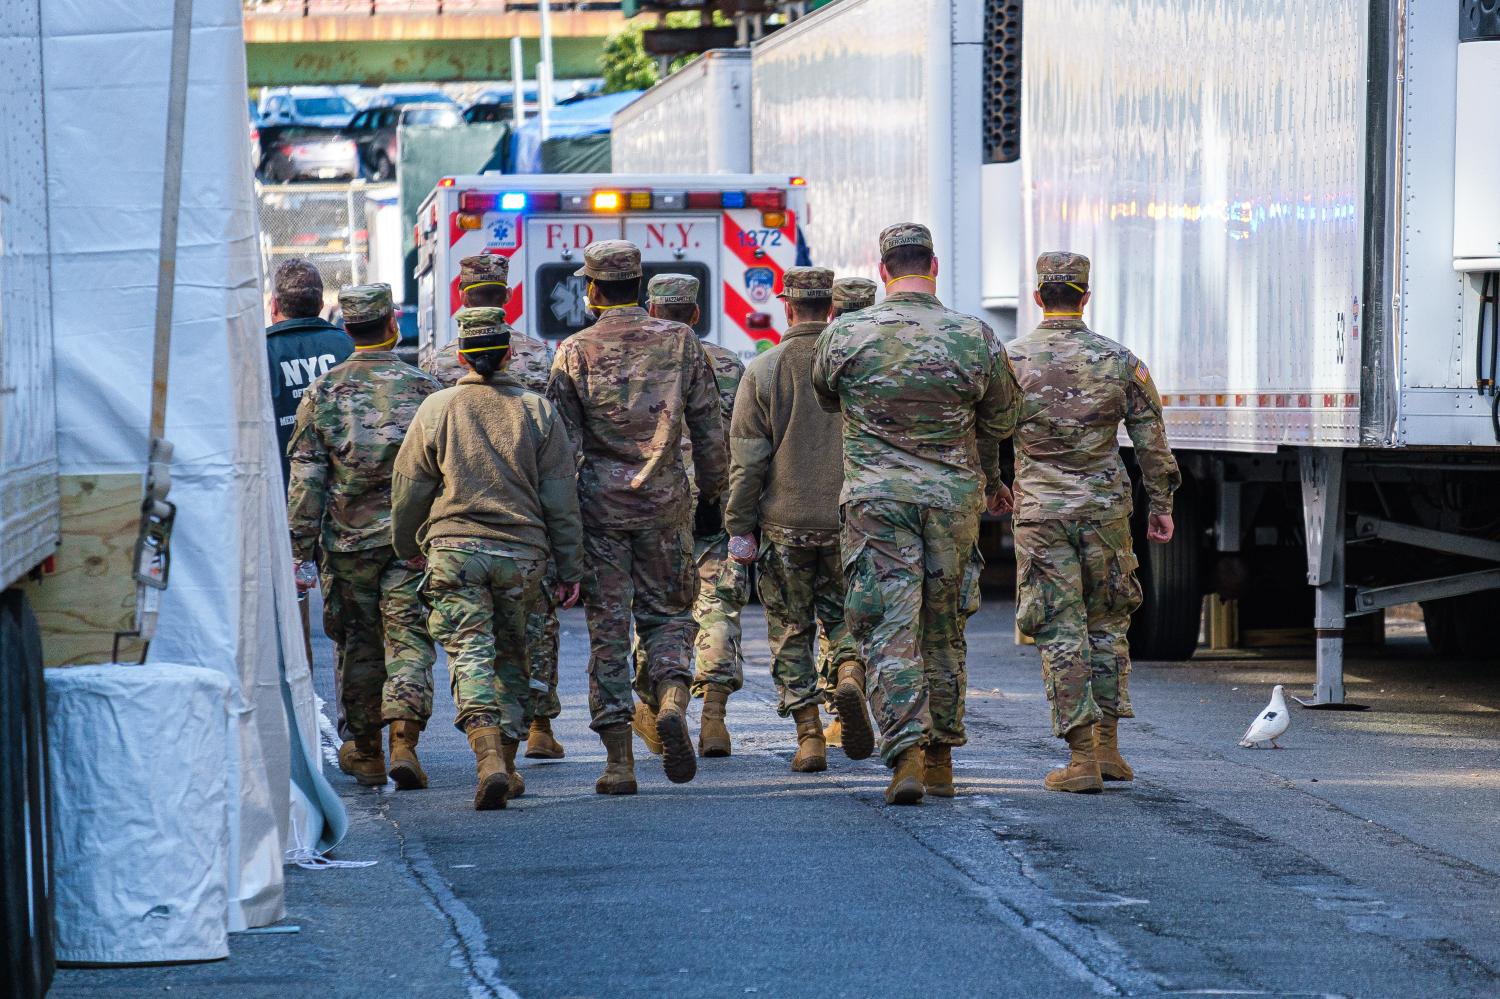 A Medical Examiner's Office employee and a unit of National Guard members walk near refrigerated trailers used as morgues on East 3oth Street near the Office of the New York City Chief Medical Examiner as the city prepares for a surge of COVID-19 cases requiring medical treatment; in New York , NY, USA on Wednesday, April 1, 2020.  (Photo by Albin Lohr-Jones/Sipa USA)No Use UK. No Use Germany.